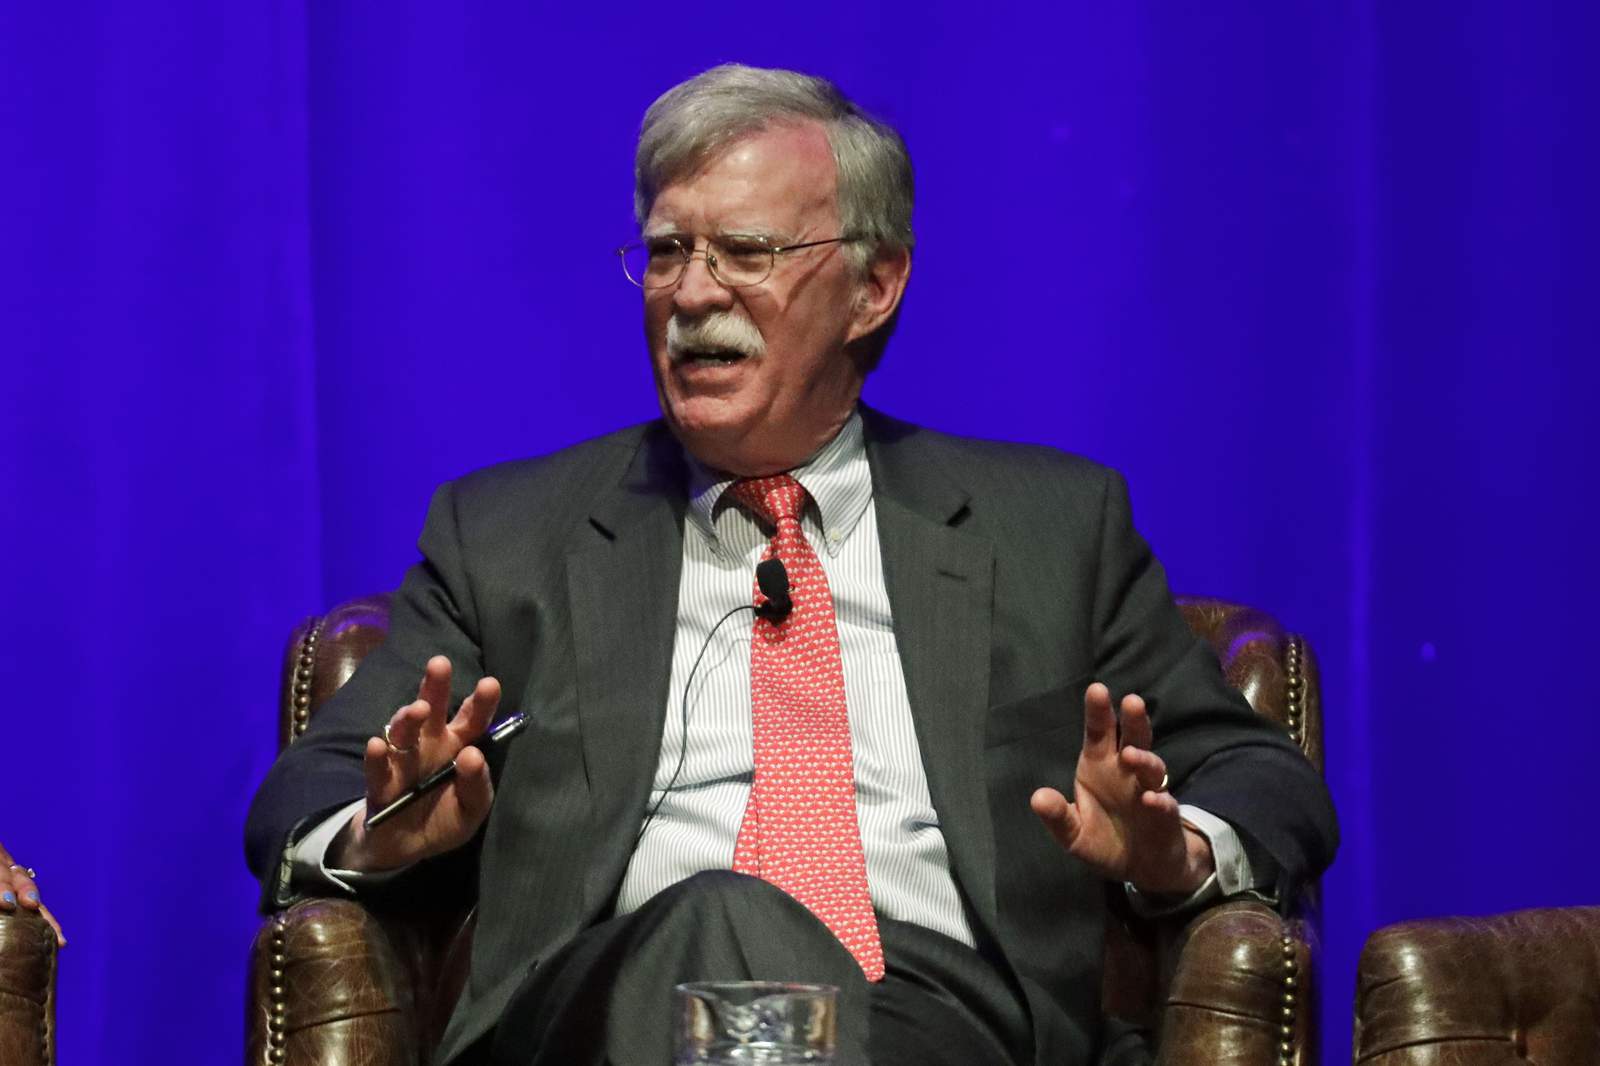 Trump: Former adviser Bolton faces charges if book released